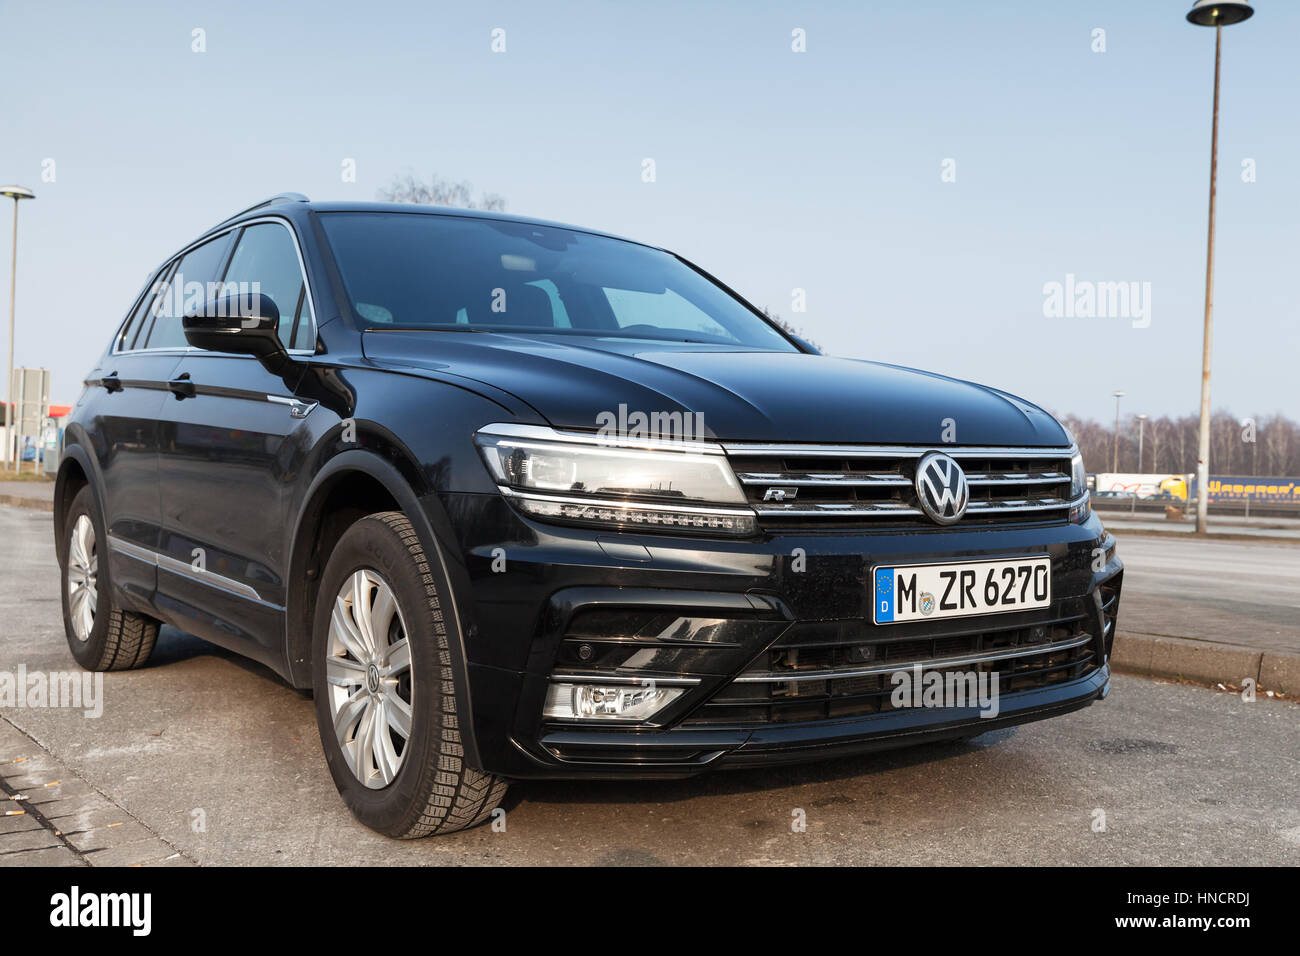 Hamburg, Germany - February 10, 2017: Outdoor photo of second generation Volkswagen Tiguan, 4x4 R-Line. Black compact crossover vehicle CUV manufactur Stock Photo